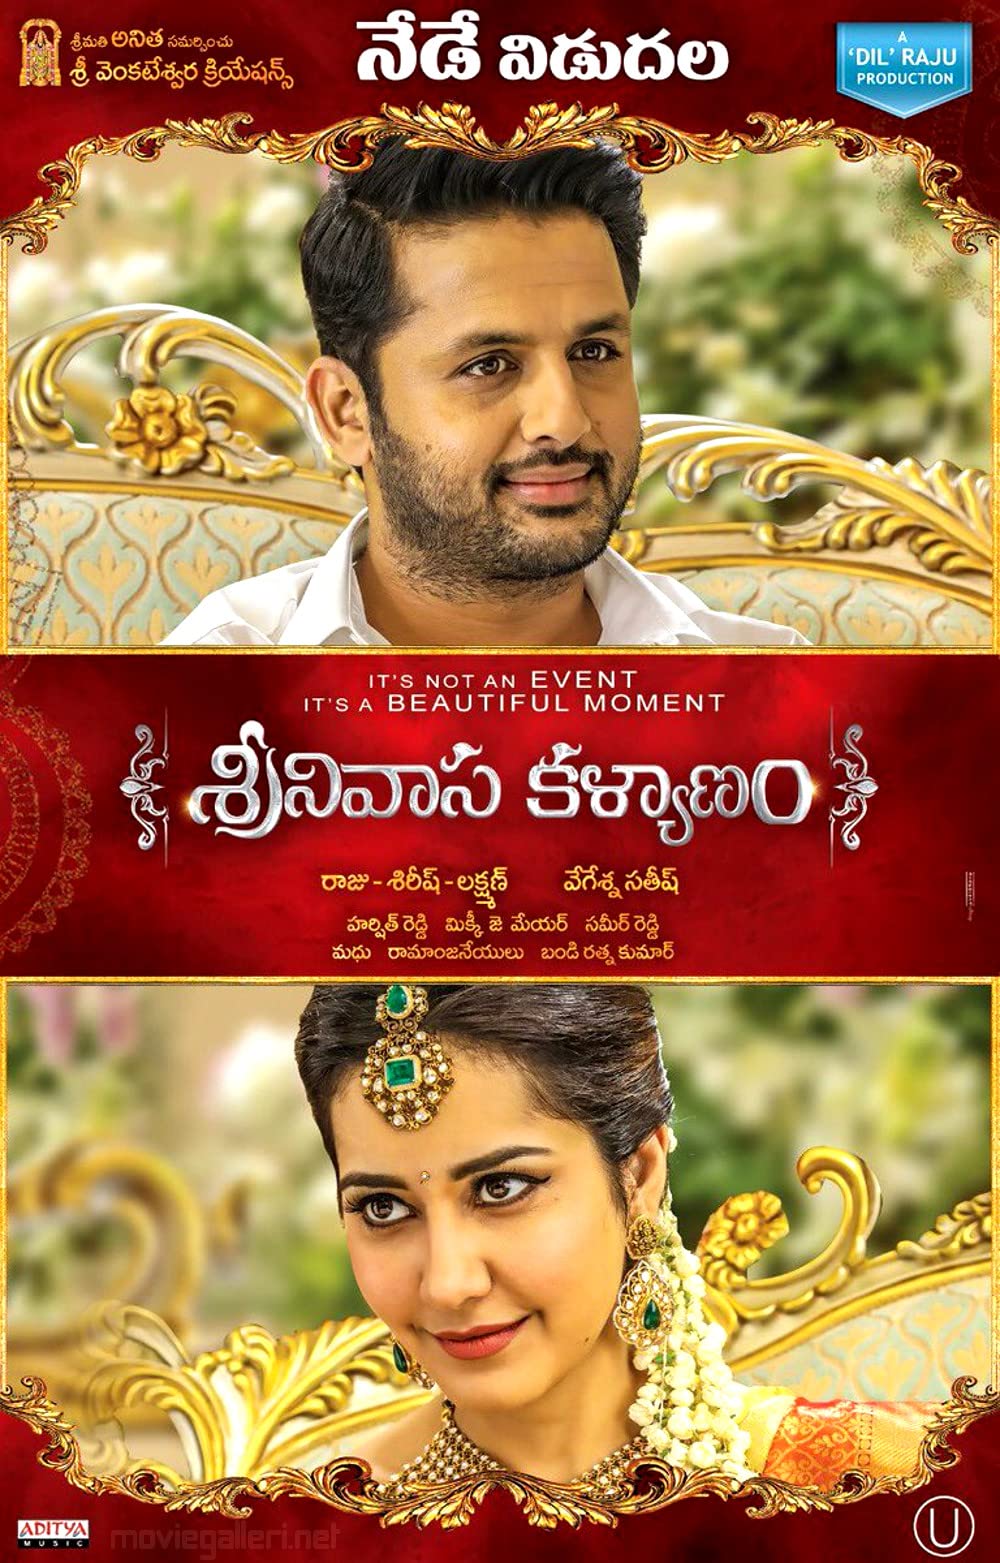 Srinivasa Kalyanam Movie (2018) Cast, Release Date, Story, Budget, Collection, Poster, Trailer, Review